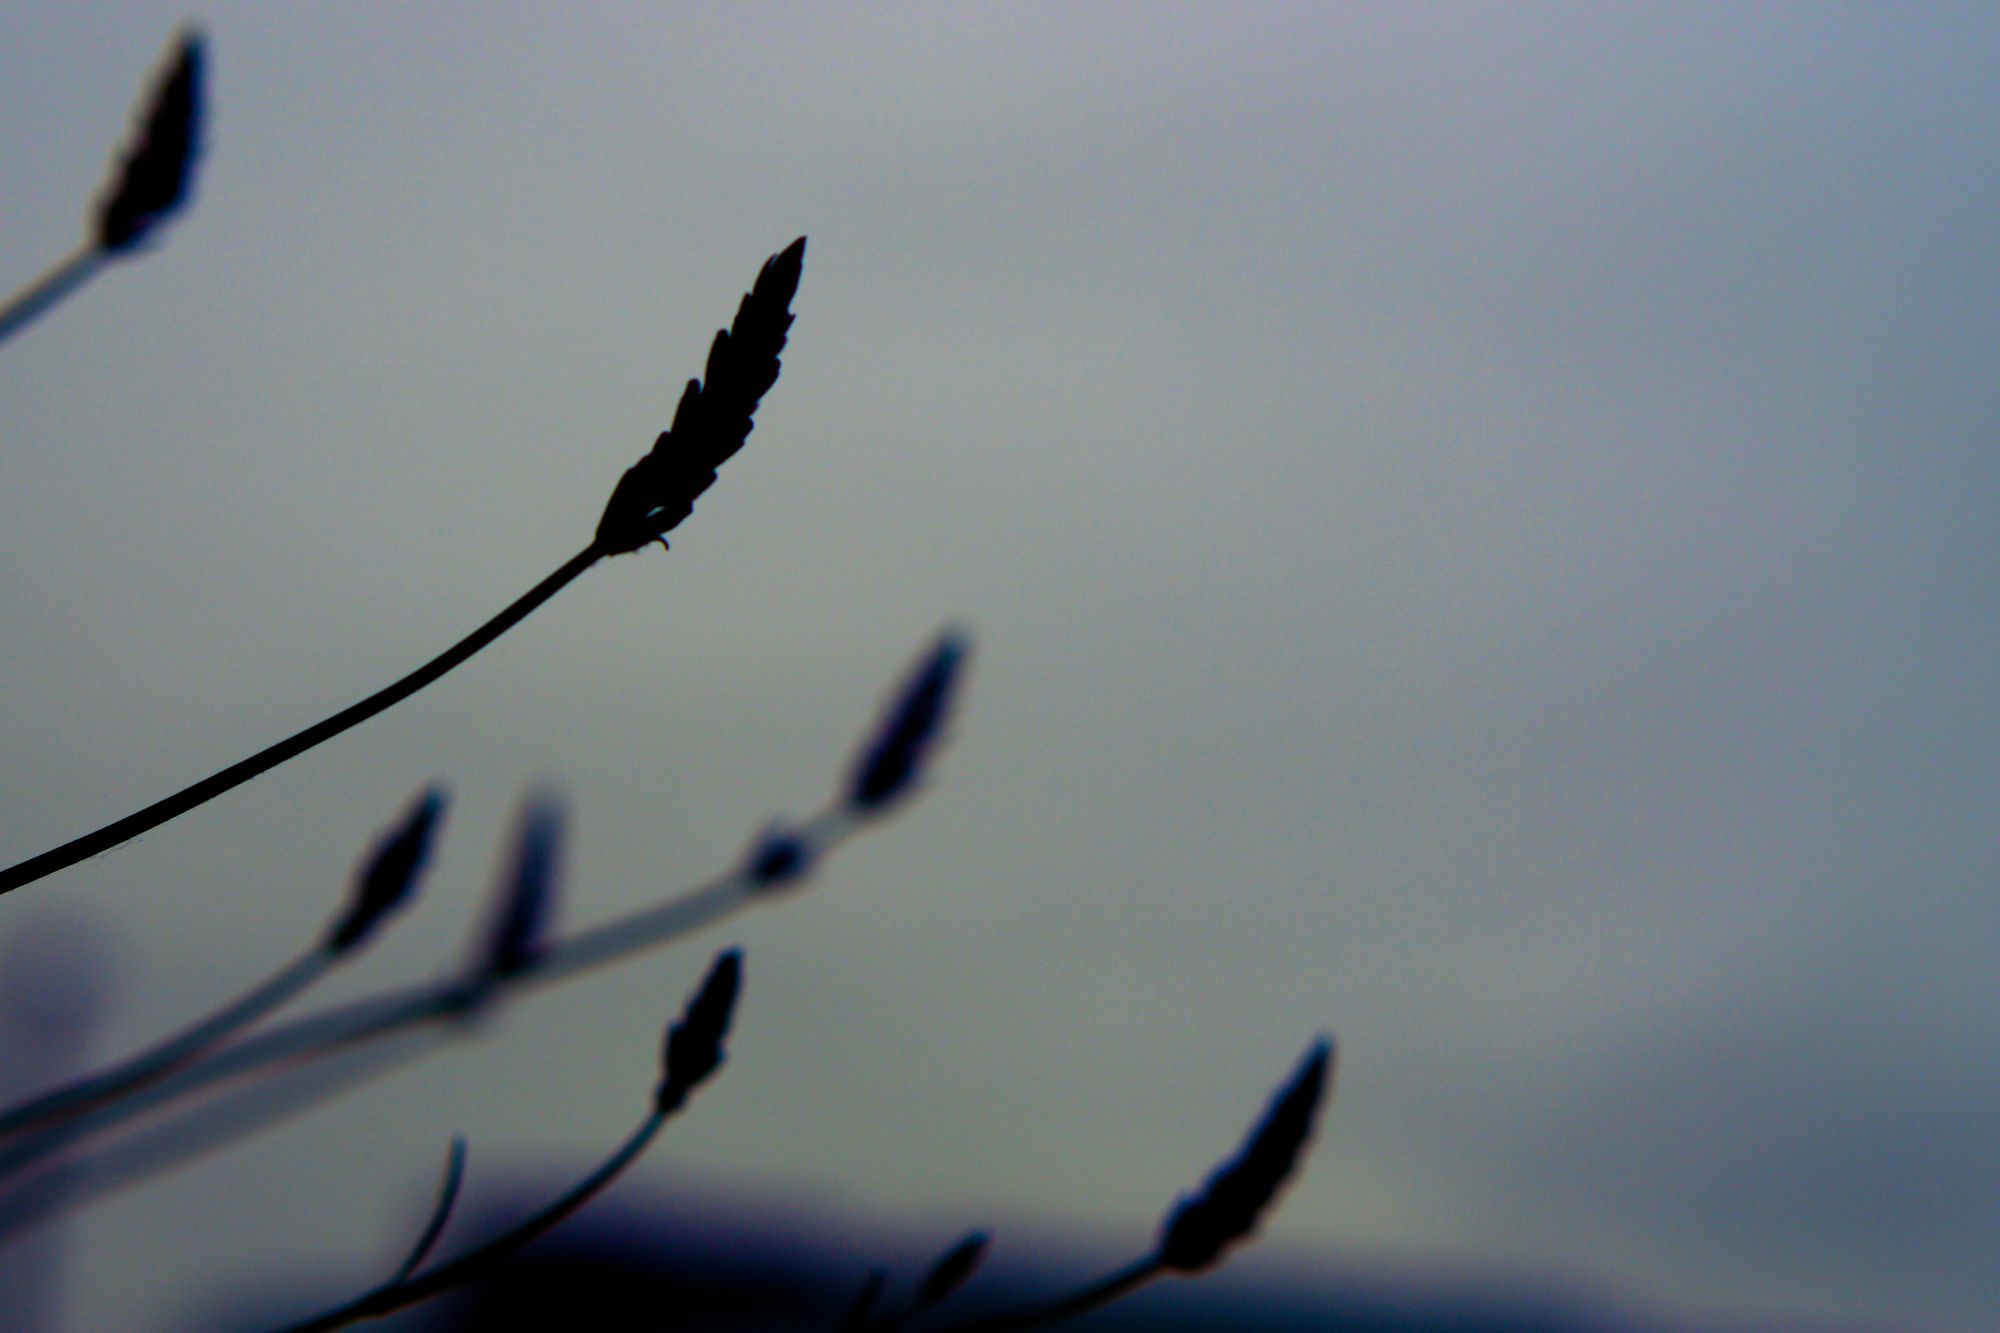 Silhouetted lavender against a grey sky, arching upwards towards the sun.